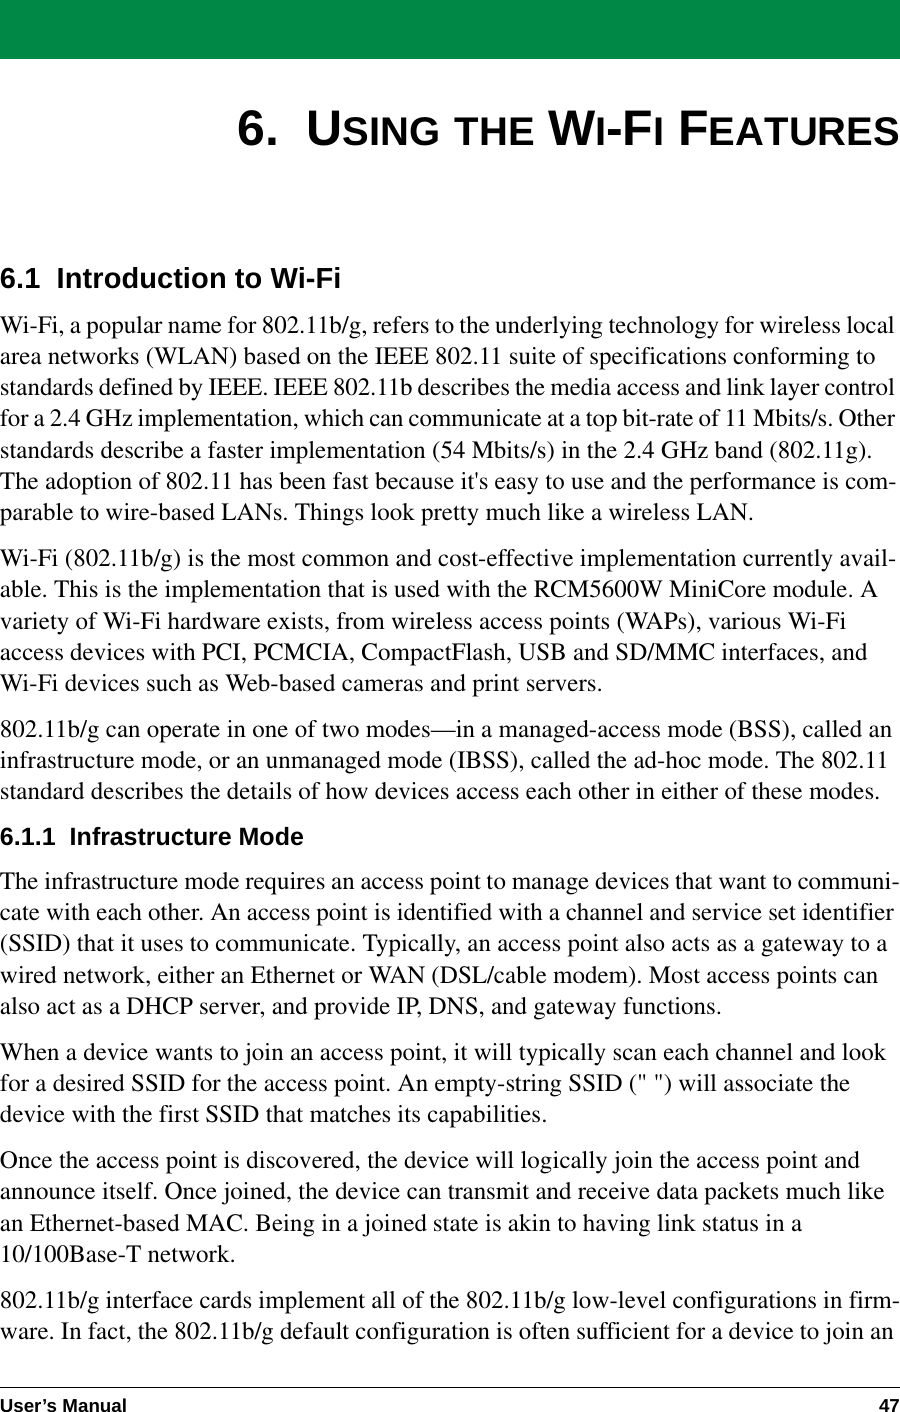 User’s Manual 476.  USING THE WI-FI FEATURES6.1  Introduction to Wi-FiWi-Fi, a popular name for 802.11b/g, refers to the underlying technology for wireless local area networks (WLAN) based on the IEEE 802.11 suite of specifications conforming to standards defined by IEEE. IEEE 802.11b describes the media access and link layer control for a 2.4 GHz implementation, which can communicate at a top bit-rate of 11 Mbits/s. Other standards describe a faster implementation (54 Mbits/s) in the 2.4 GHz band (802.11g). The adoption of 802.11 has been fast because it&apos;s easy to use and the performance is com-parable to wire-based LANs. Things look pretty much like a wireless LAN.Wi-Fi (802.11b/g) is the most common and cost-effective implementation currently avail-able. This is the implementation that is used with the RCM5600W MiniCore module. A variety of Wi-Fi hardware exists, from wireless access points (WAPs), various Wi-Fi access devices with PCI, PCMCIA, CompactFlash, USB and SD/MMC interfaces, and Wi-Fi devices such as Web-based cameras and print servers.802.11b/g can operate in one of two modes—in a managed-access mode (BSS), called an infrastructure mode, or an unmanaged mode (IBSS), called the ad-hoc mode. The 802.11 standard describes the details of how devices access each other in either of these modes.6.1.1  Infrastructure ModeThe infrastructure mode requires an access point to manage devices that want to communi-cate with each other. An access point is identified with a channel and service set identifier (SSID) that it uses to communicate. Typically, an access point also acts as a gateway to a wired network, either an Ethernet or WAN (DSL/cable modem). Most access points can also act as a DHCP server, and provide IP, DNS, and gateway functions.When a device wants to join an access point, it will typically scan each channel and look for a desired SSID for the access point. An empty-string SSID (&quot; &quot;) will associate the device with the first SSID that matches its capabilities.Once the access point is discovered, the device will logically join the access point and announce itself. Once joined, the device can transmit and receive data packets much like an Ethernet-based MAC. Being in a joined state is akin to having link status in a 10/100Base-T network.802.11b/g interface cards implement all of the 802.11b/g low-level configurations in firm-ware. In fact, the 802.11b/g default configuration is often sufficient for a device to join an 